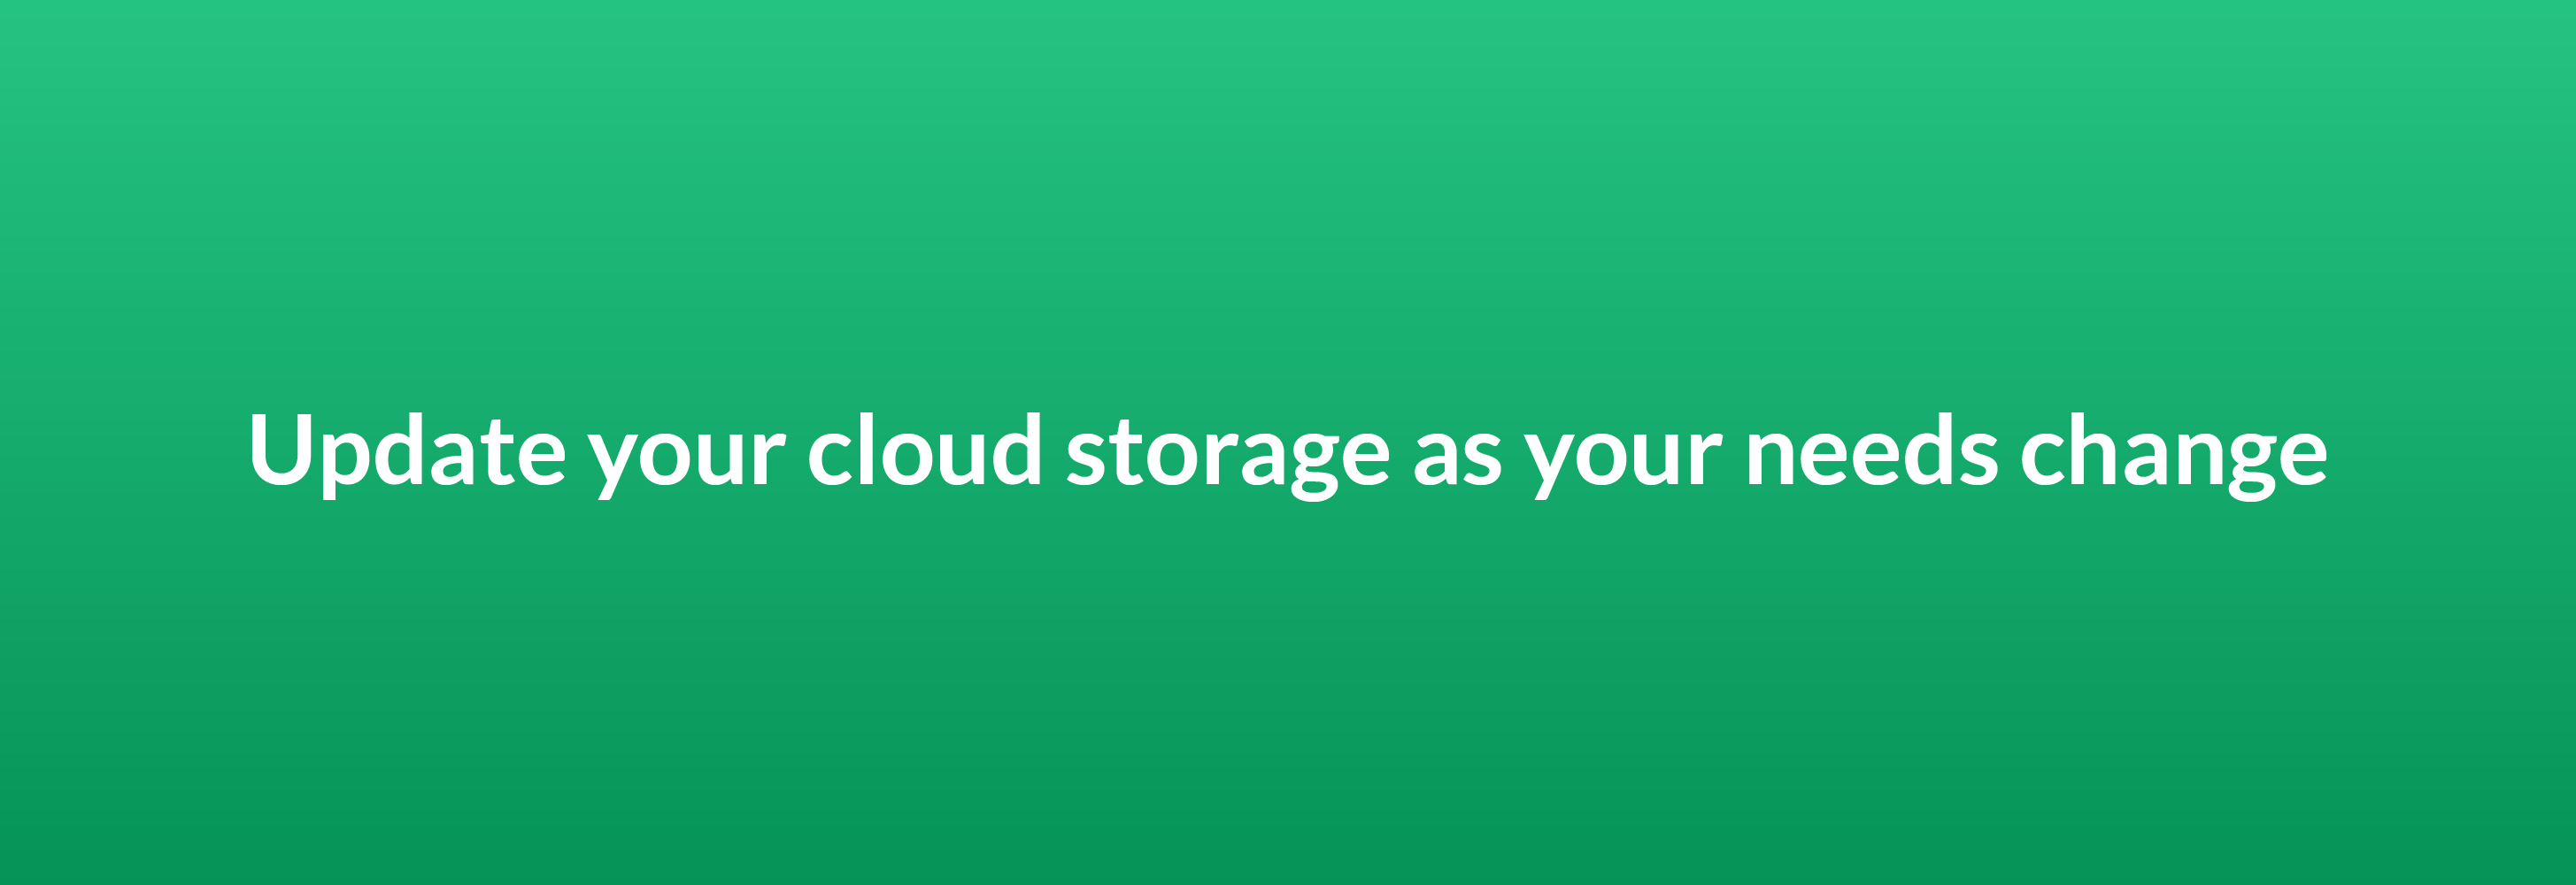 Update your cloud storage as your needs change